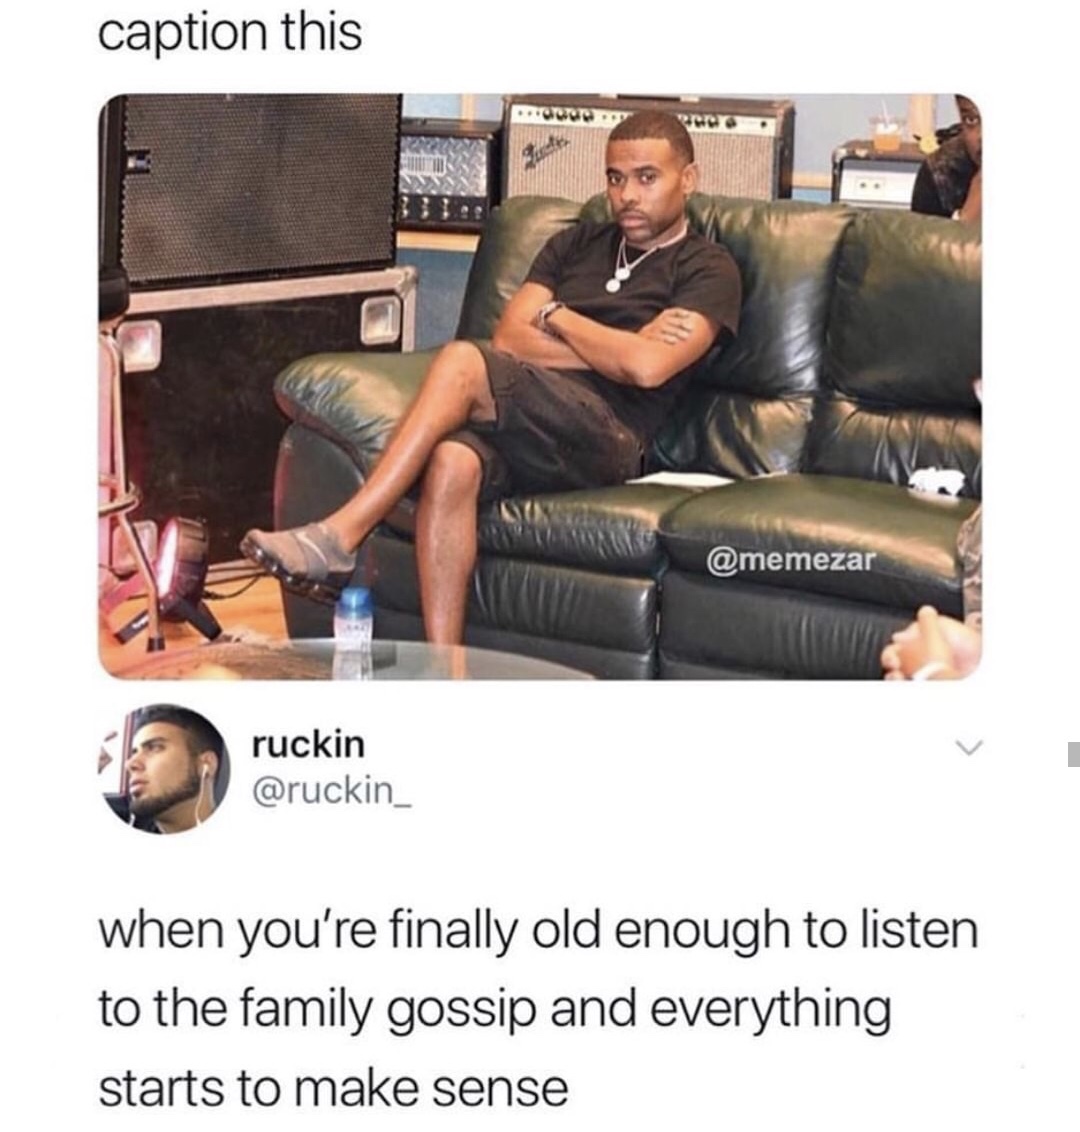 Caption this of man sitting on sofa and someone says when your are old enought to listen to family gossip and everything starts to make sense